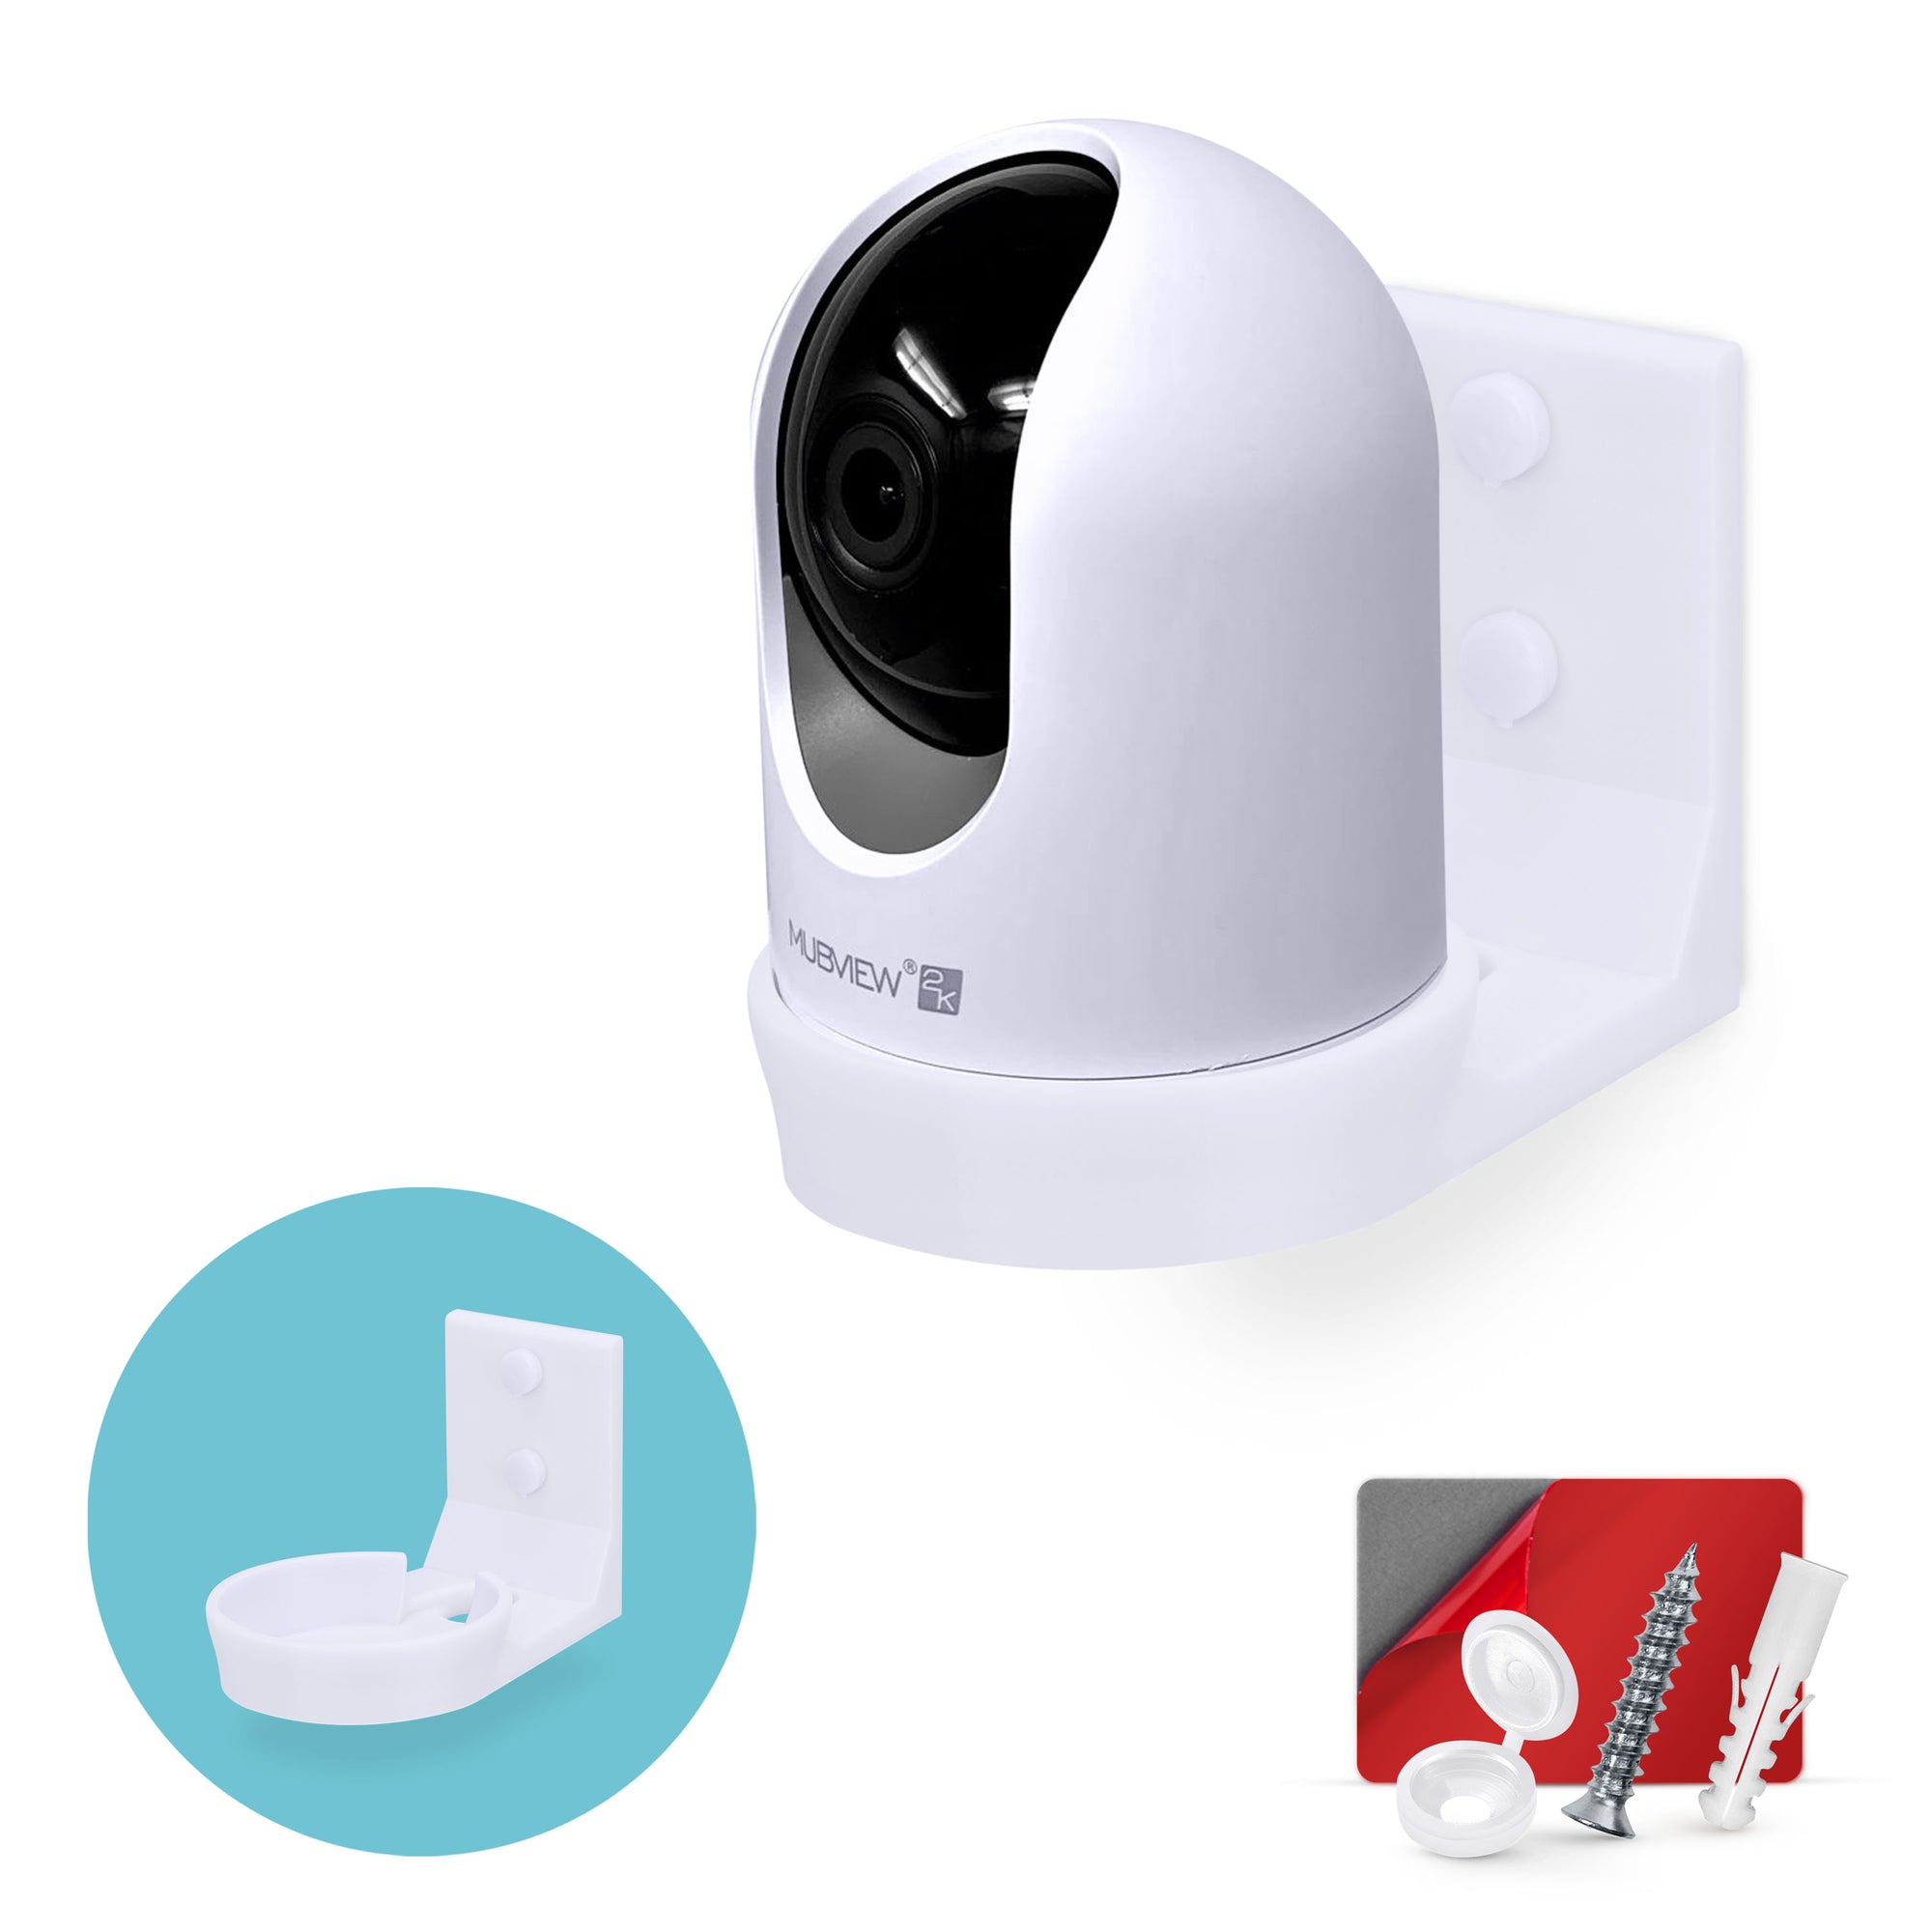 Wall Mount For Mubview PK320 Pet & Baby Indoor Baby Monitor Pet Security Camera - Easy to Install, Reduce Blind Spots & Clutter